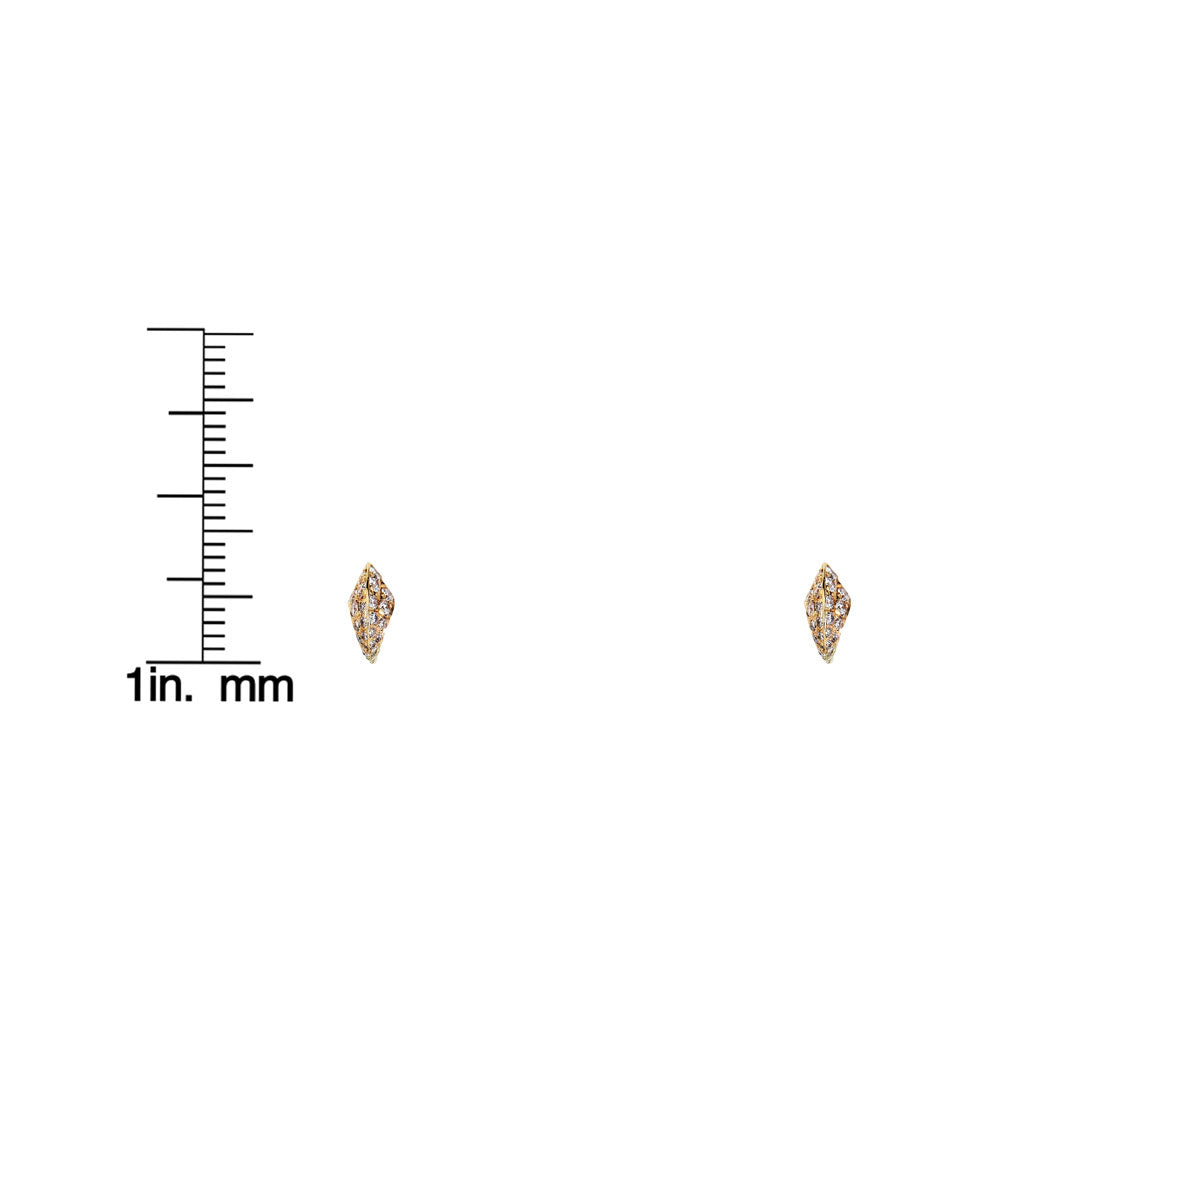 white diamond cats claw stud earrings scale measurement